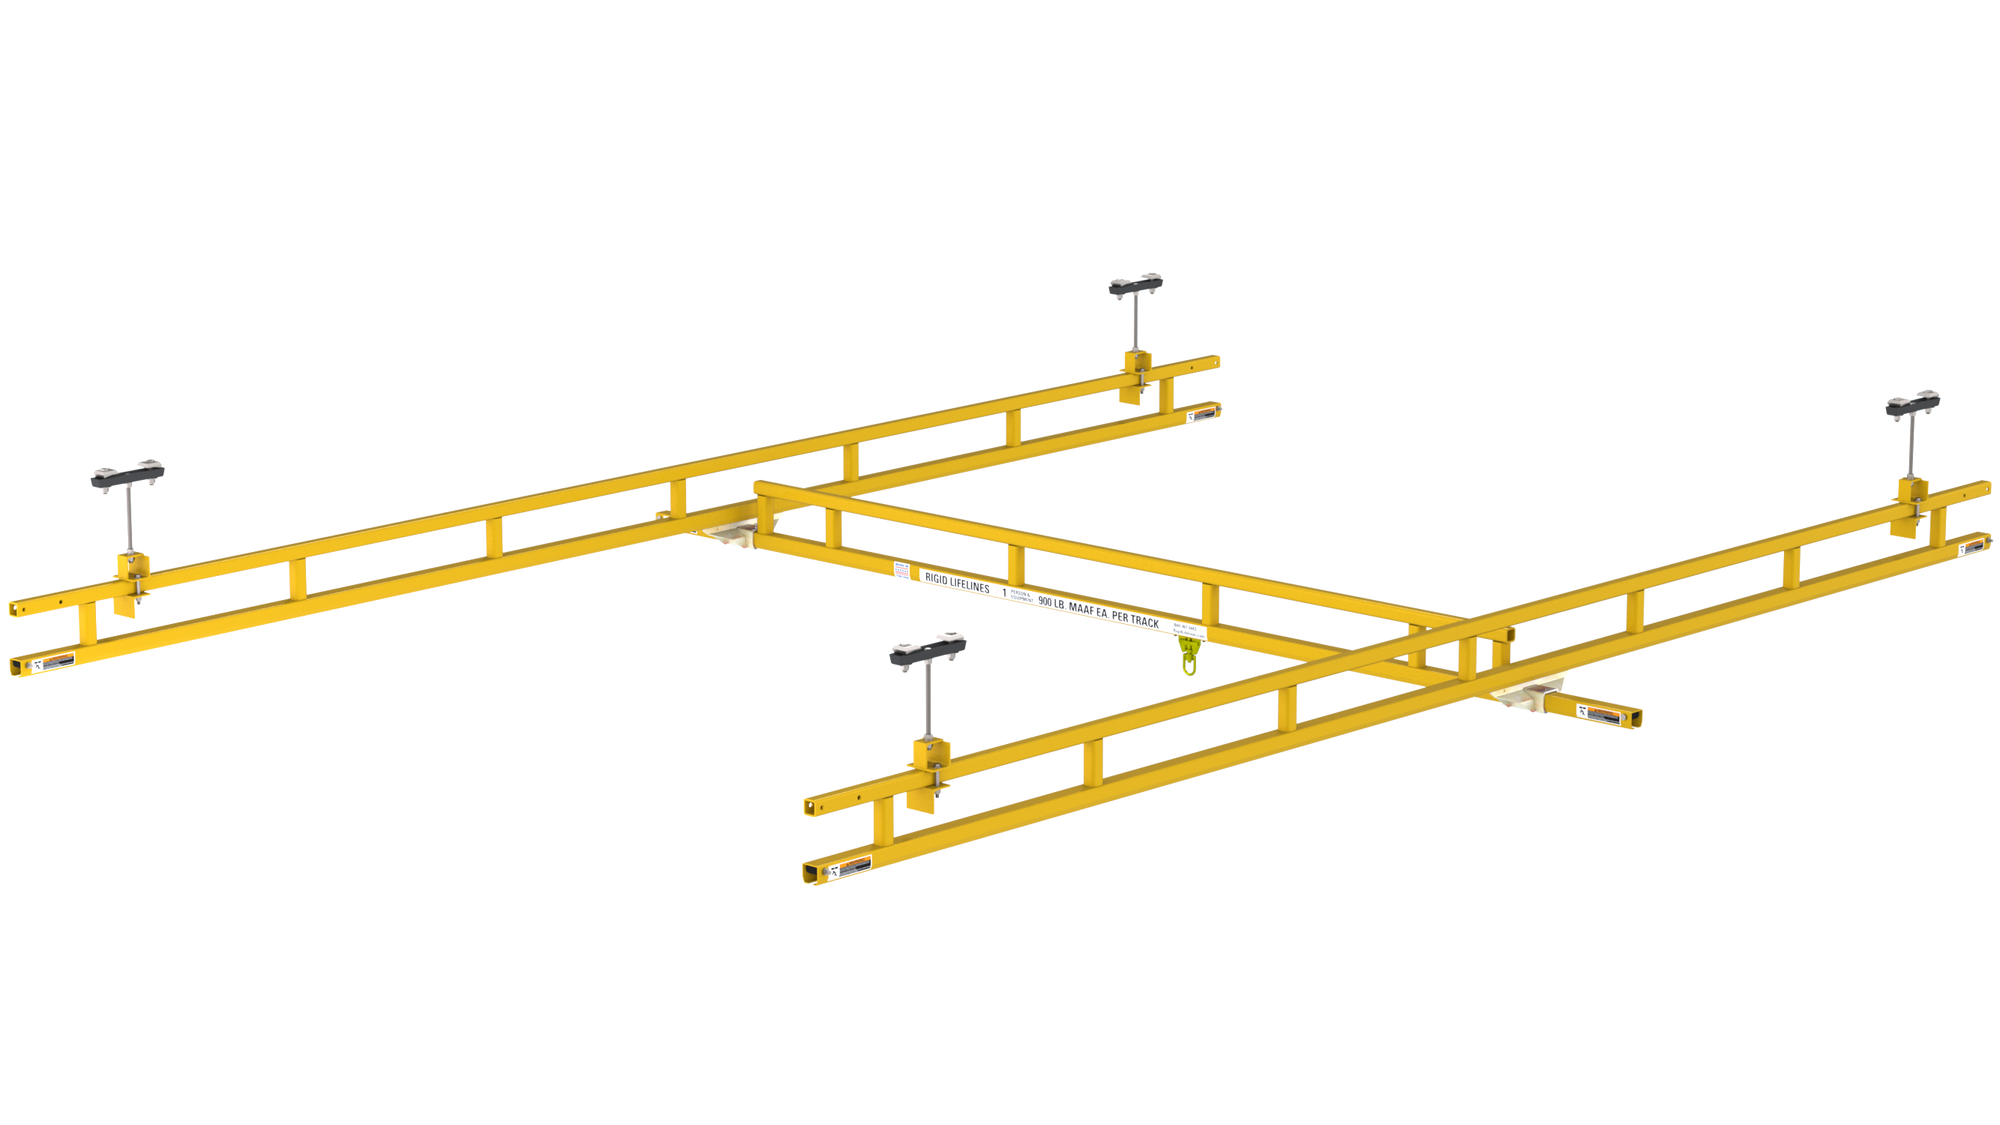 Ceiling Mount Traveling Bridge With 30' Track Support Spacing